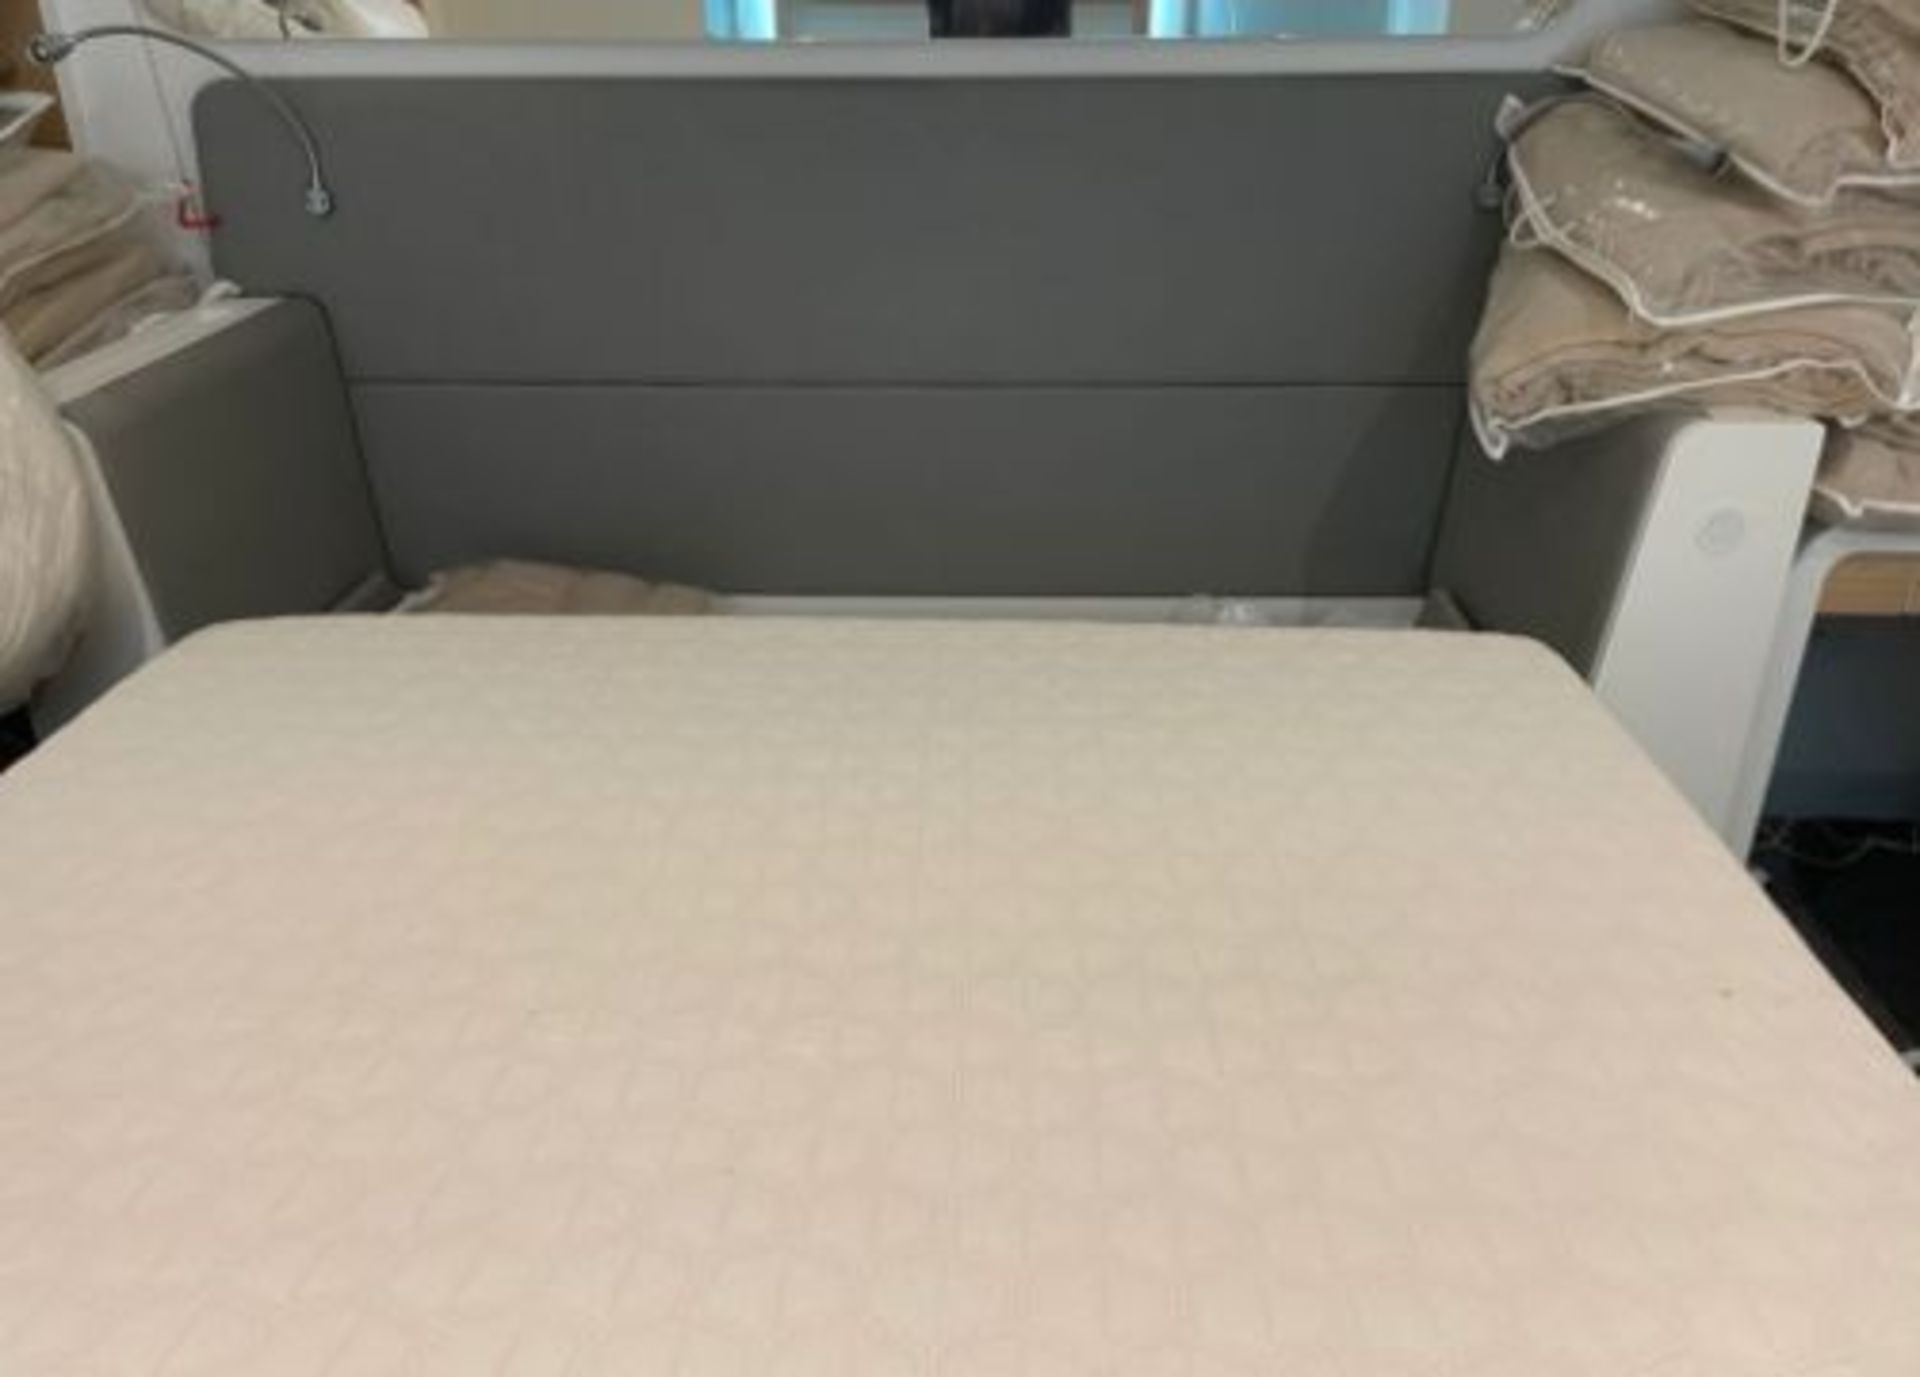 1 x Double Adjustable Space Saving Smart Bed With Serta Motion Memory Foam Mattress - Signature - Image 2 of 12